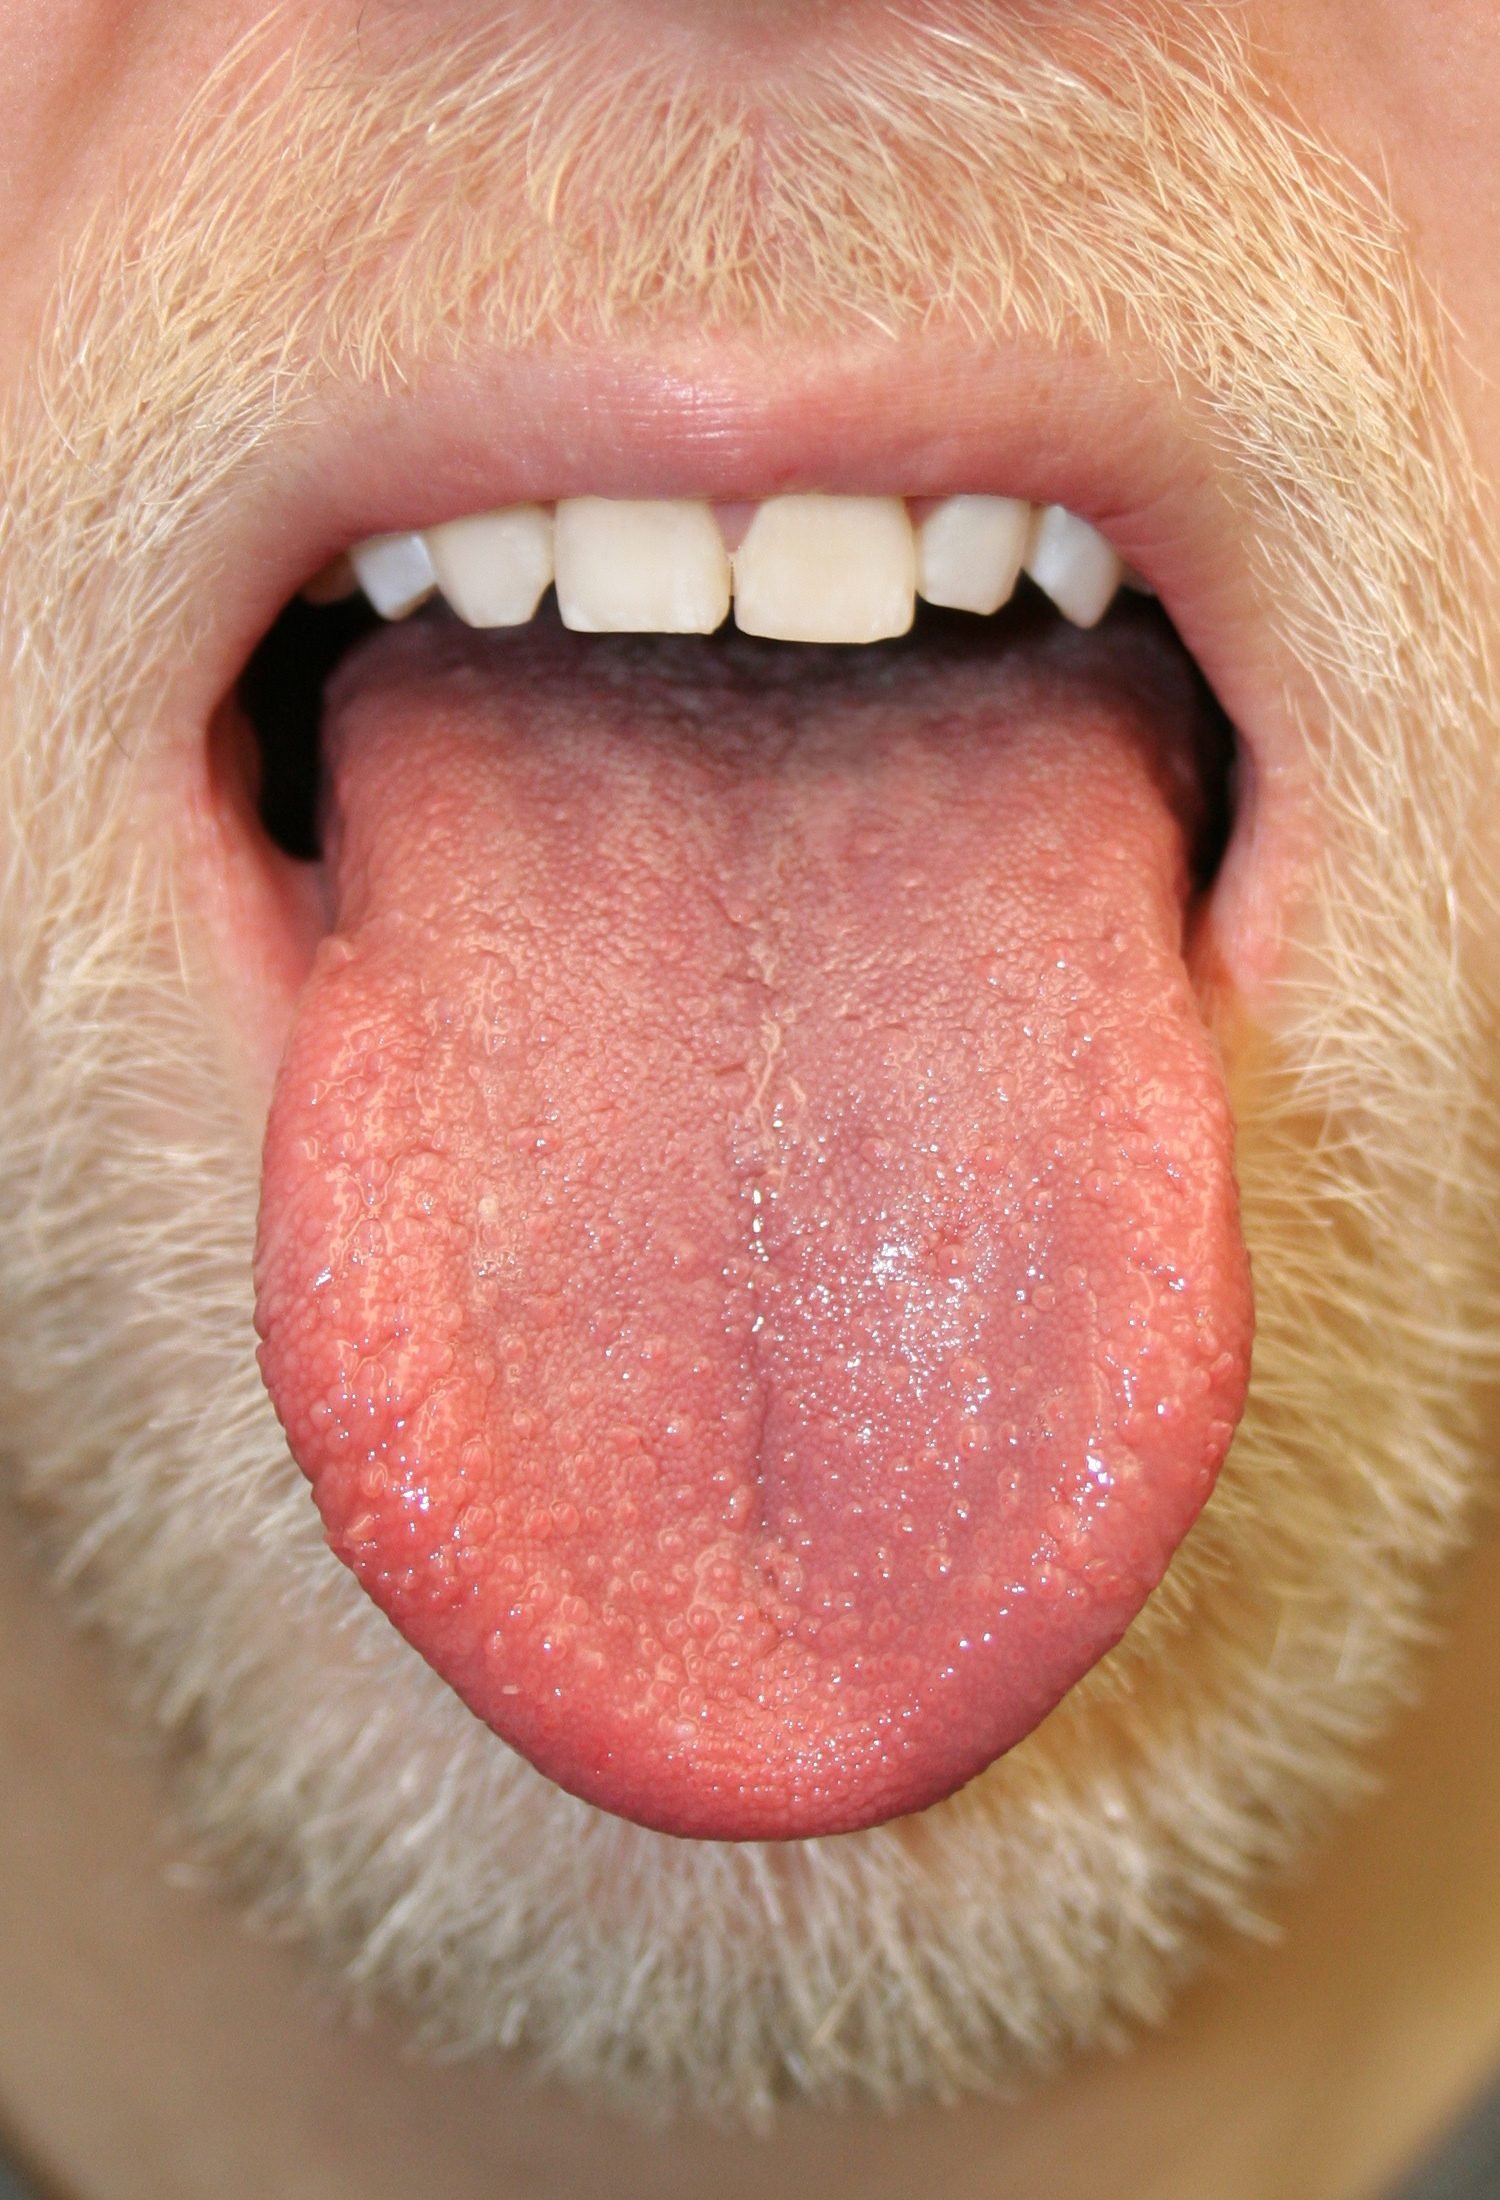 Bumps On The Tongue What It Could Mean Readers Digest